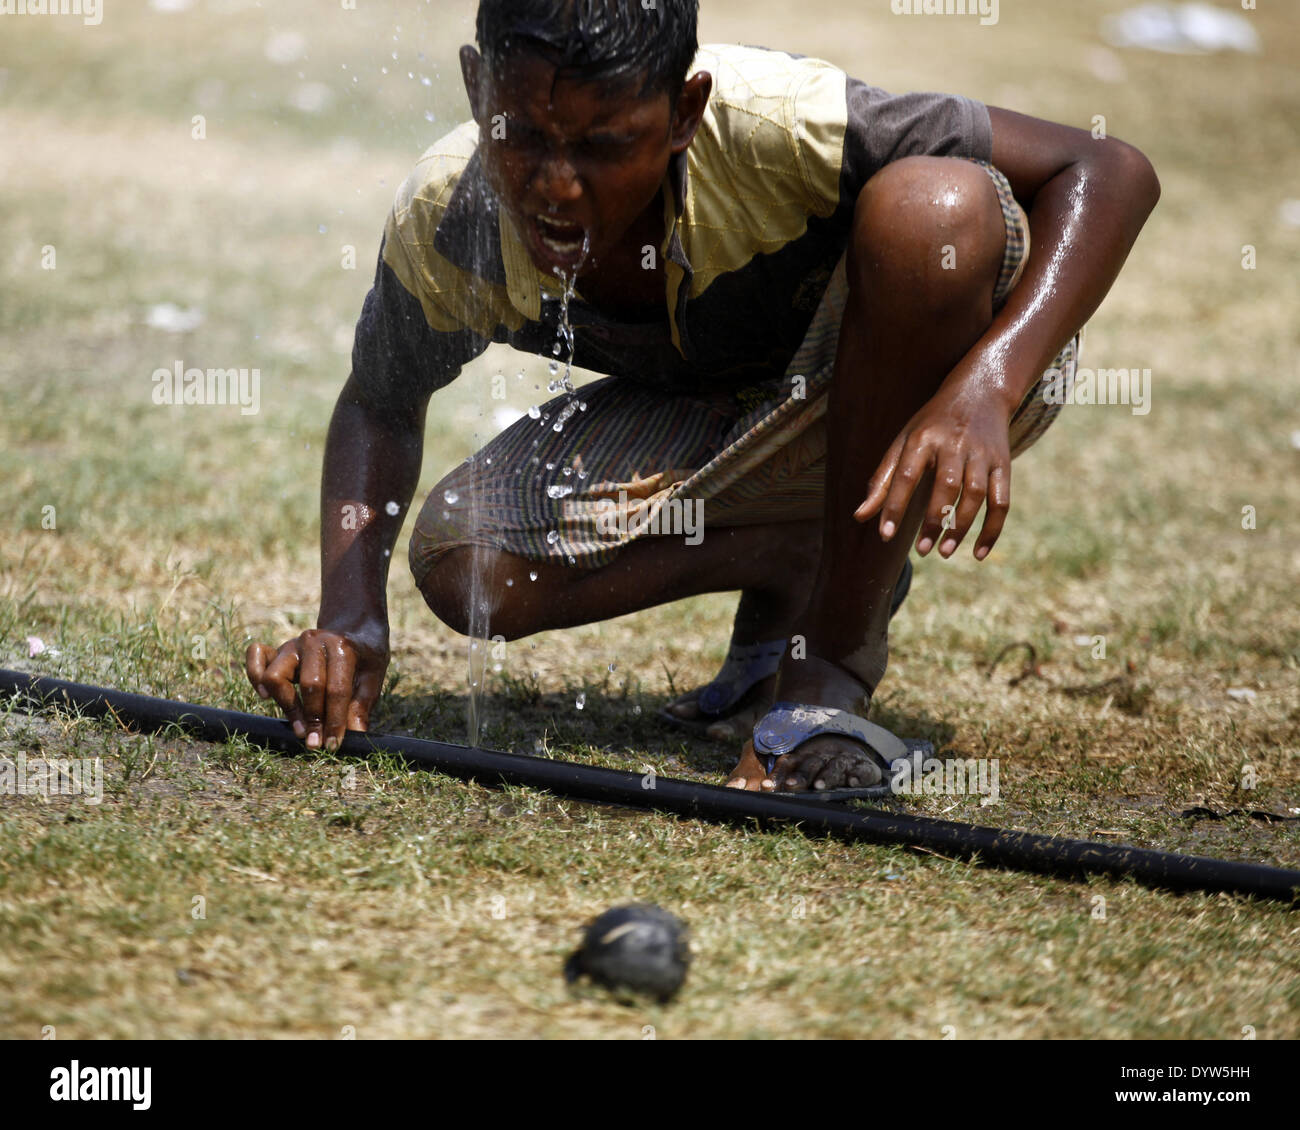 Dhaka, Bangladesh. 25th Apr, 2014. A boy drinking water from water pipe while playing on field.People in the capital experienced the hottest day in the last 54 years as the mercury shot up to 40.7 degrees Celsius yesterday, the Met office says.The previous highest temperature in the capital was recorded 42.3 degrees on April 30, 1960, according to Bangladesh Meteorological Department. The highest temperature on April 24 last year in Dhaka was 34.2 degrees. Credit:  Zakir Hossain Chowdhury/NurPhoto/ZUMAPRESS.com/Alamy Live News Stock Photo